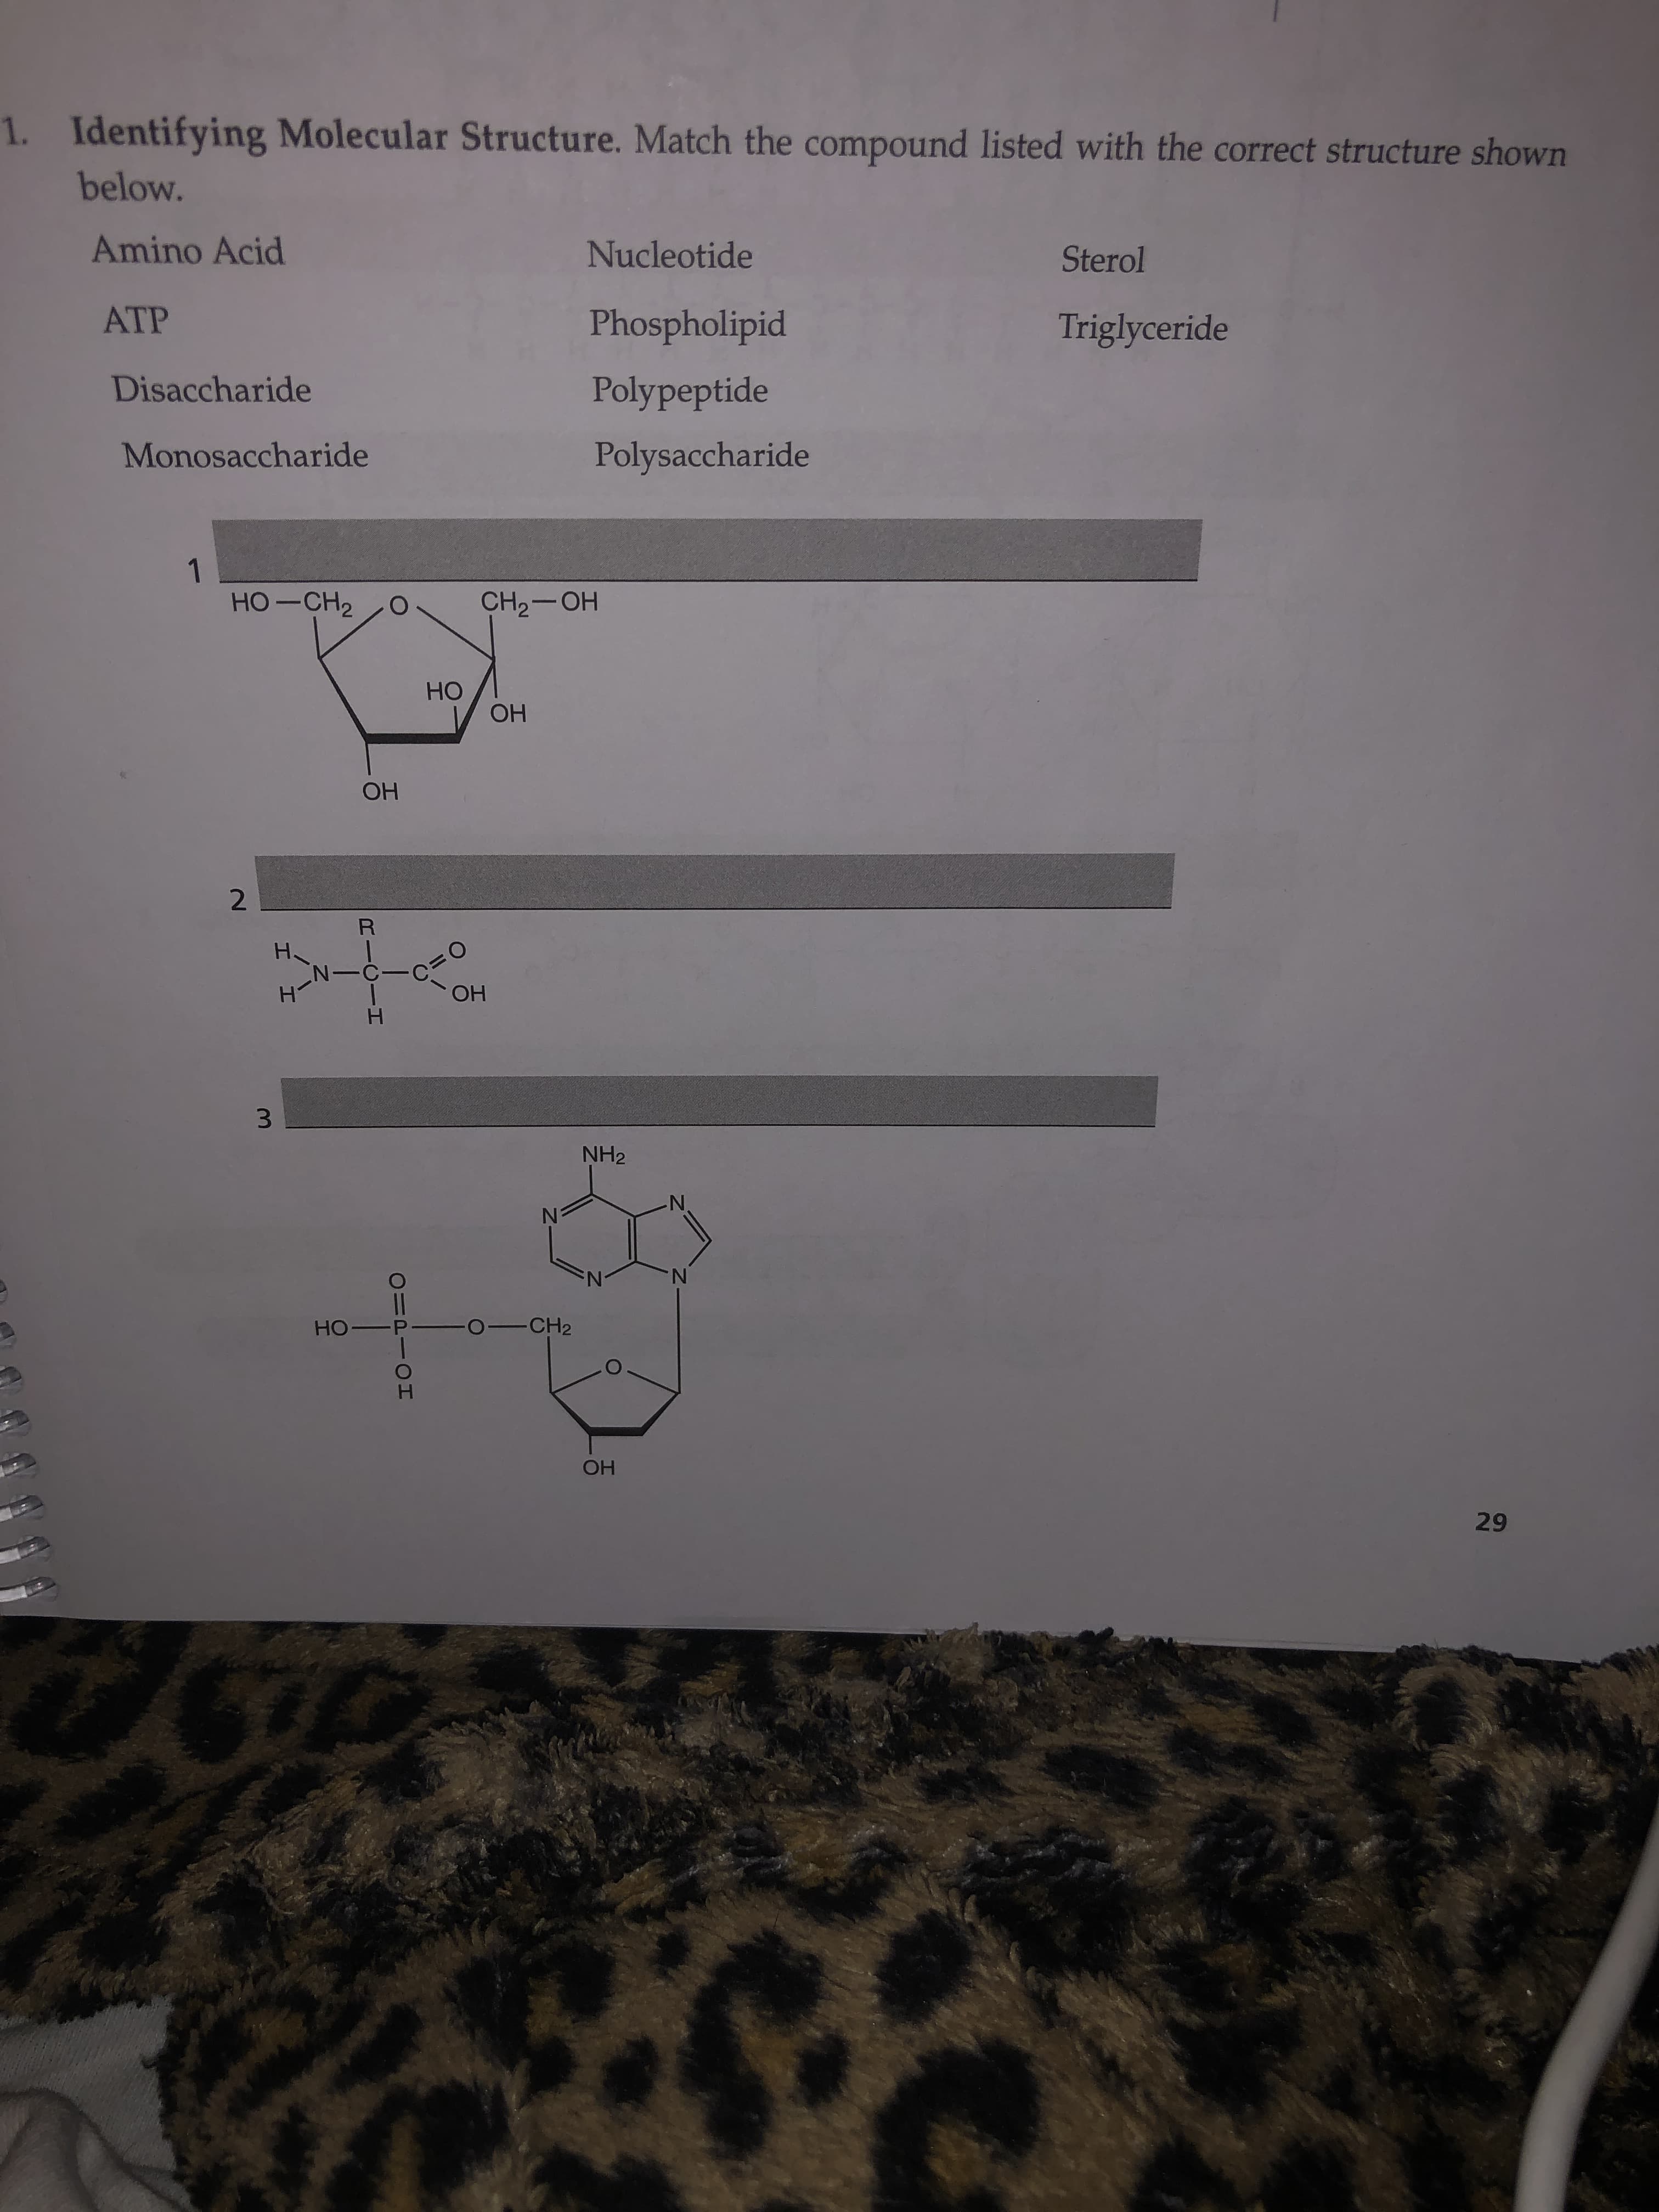 1. Identifying Molecular Structure. Match the compound listed with the correct structure shown
below.
Amino Acid
Nucleotide
Sterol
ATP
Phospholipid
Triglyceride
Disaccharide
Polypeptide
Monosaccharide
Polysaccharide
1
HO-CH2
CH2-OH
НО
ОН
ОН
2
R
Н.
N-C-C
ОН
H.
3.
NH2
N.
N.
---CH2
ОН
29
O=PIOHI
